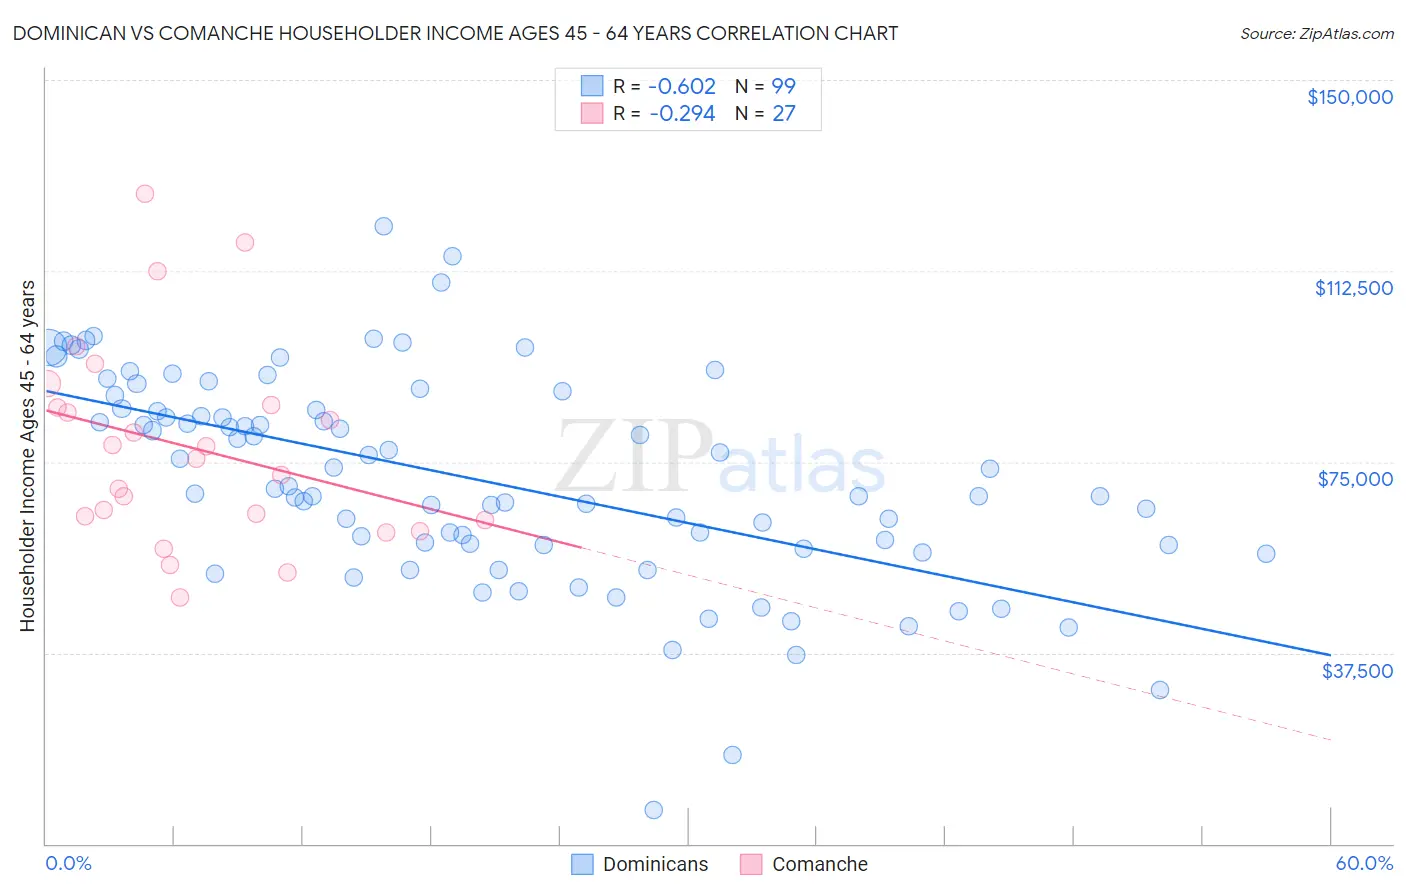 Dominican vs Comanche Householder Income Ages 45 - 64 years